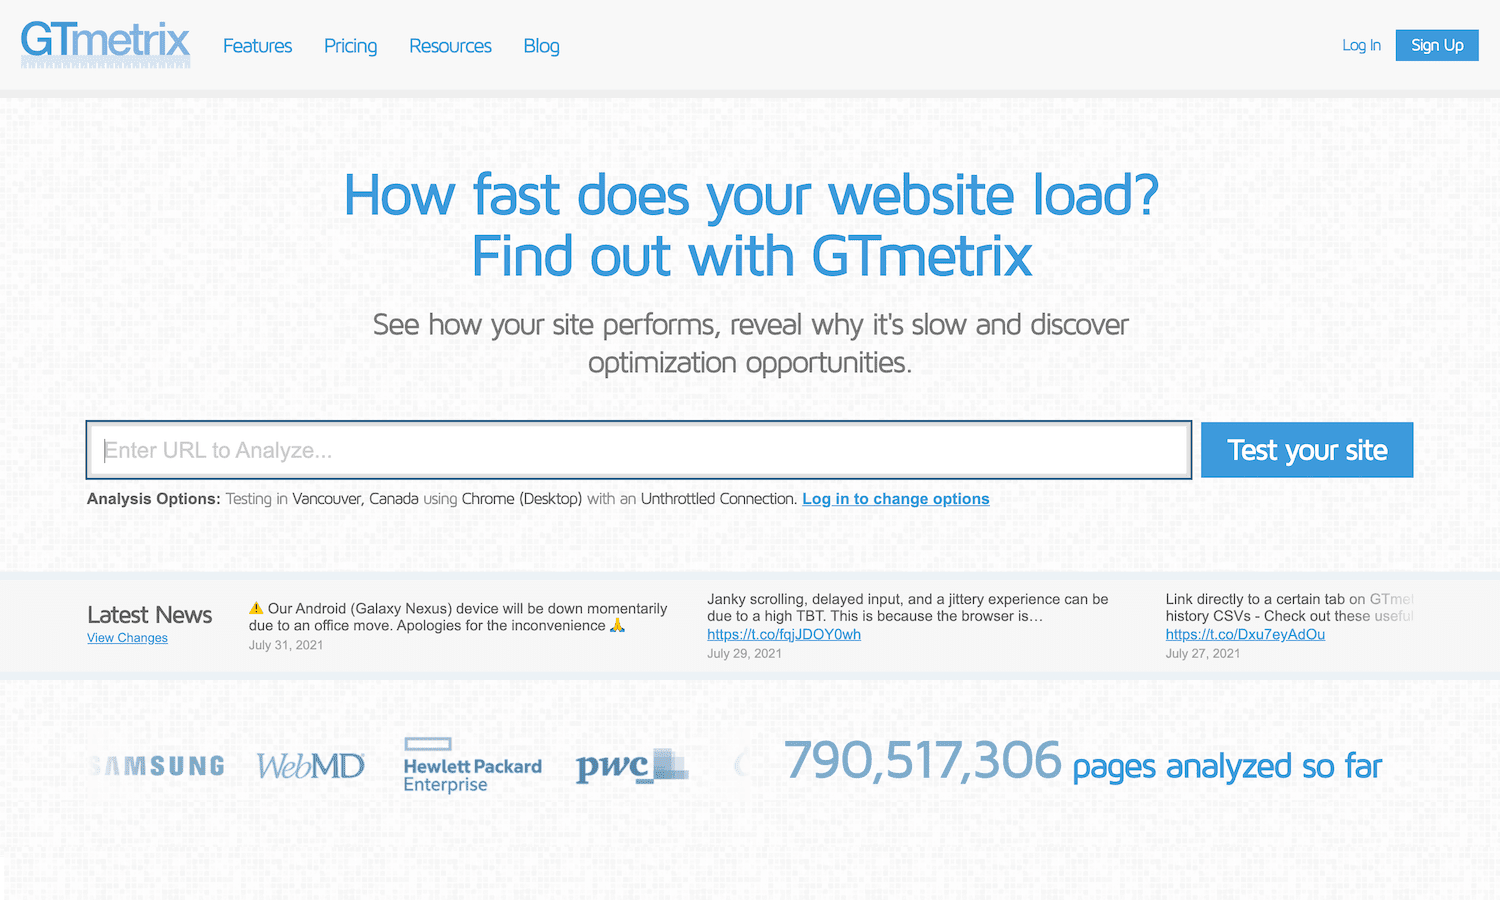 The home page of the GTmetrix benchmark tool with the text "How fast is your website loading?" Find out with GTmetrix”.